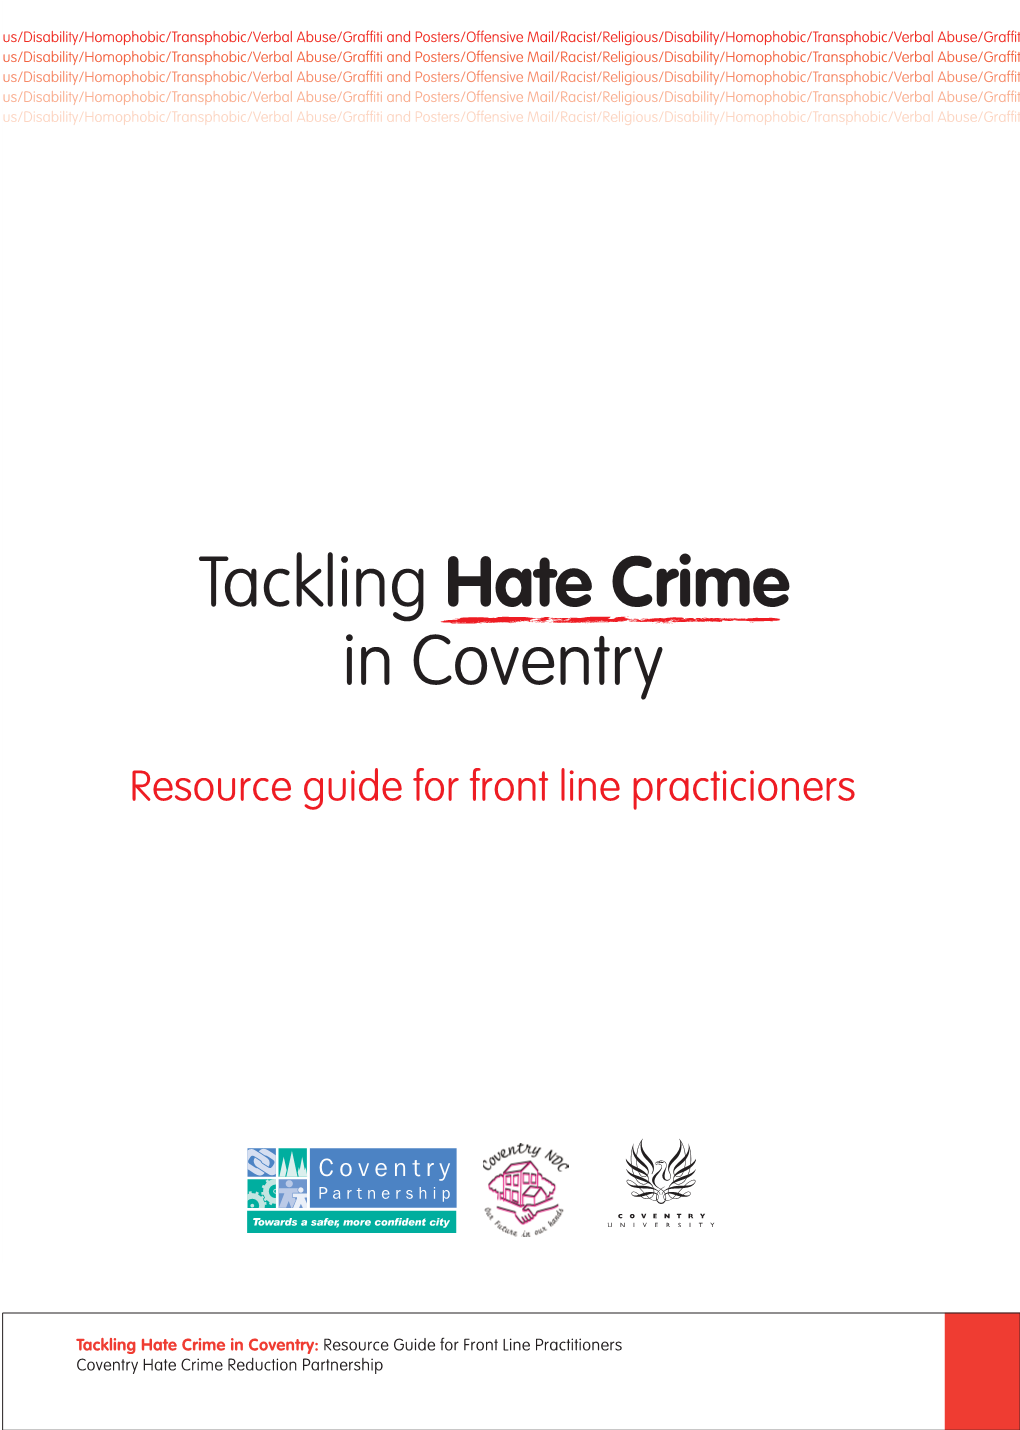 Tackling Hate Crime in Coventry